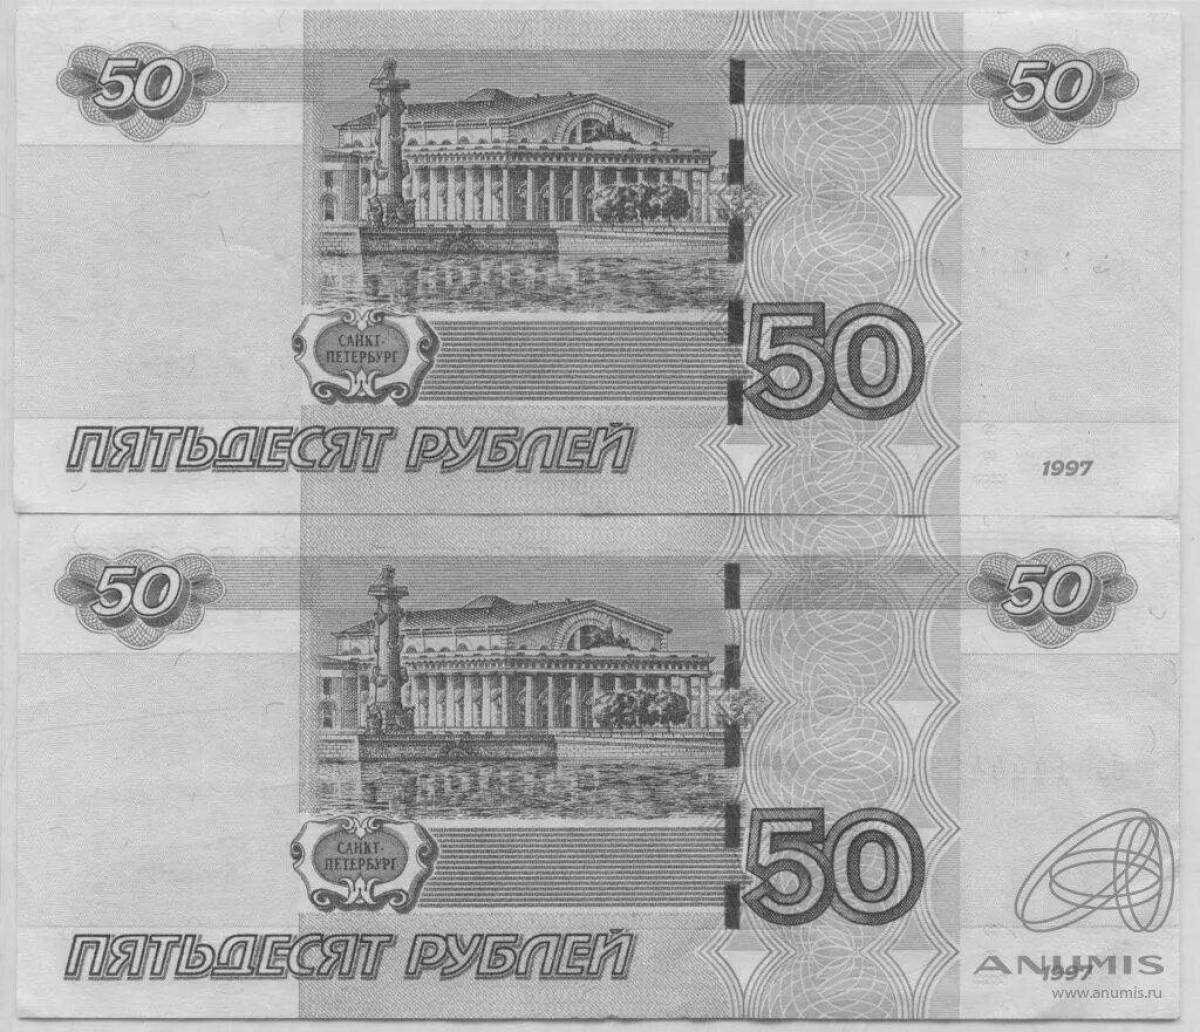 50 rubles #8